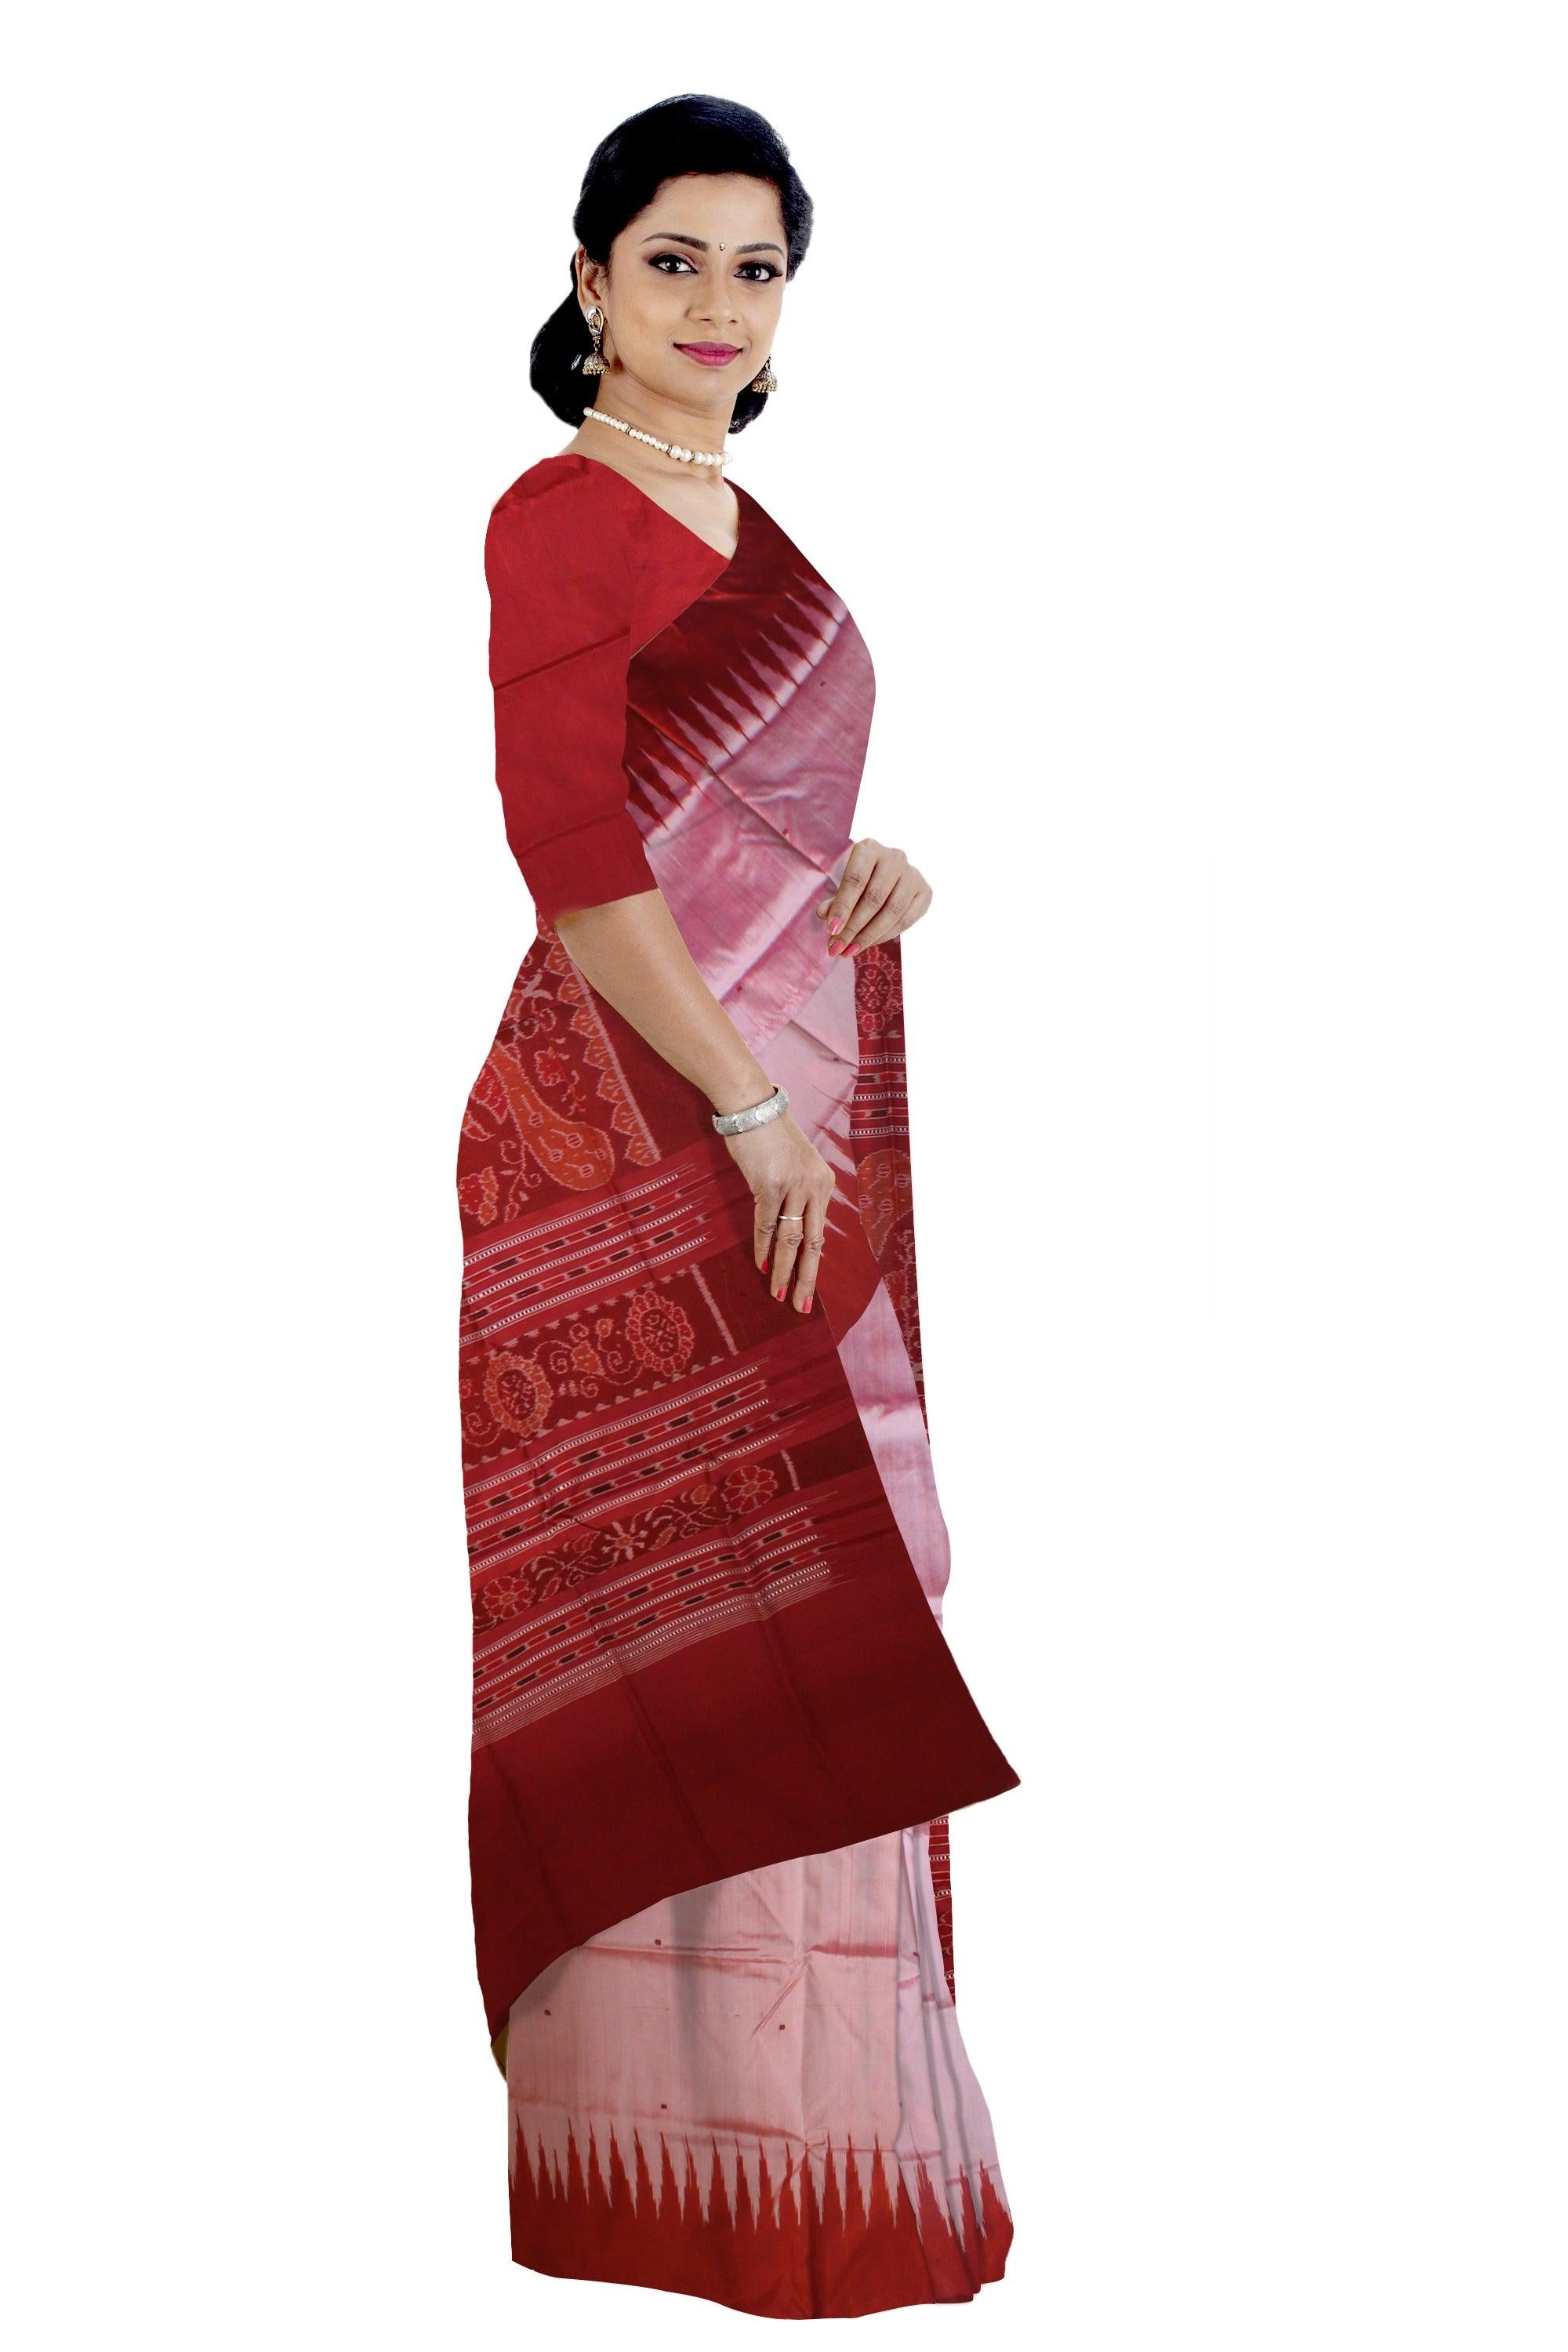 NEW COLLECTION TEMPLE DESIGN WITH BOOTY PATTERN PATA SAREE IN LIGHT PINK AND RED COLOUR, AVAILABALE WITH BLOUSE PIECE. - Koshali Arts & Crafts Enterprise